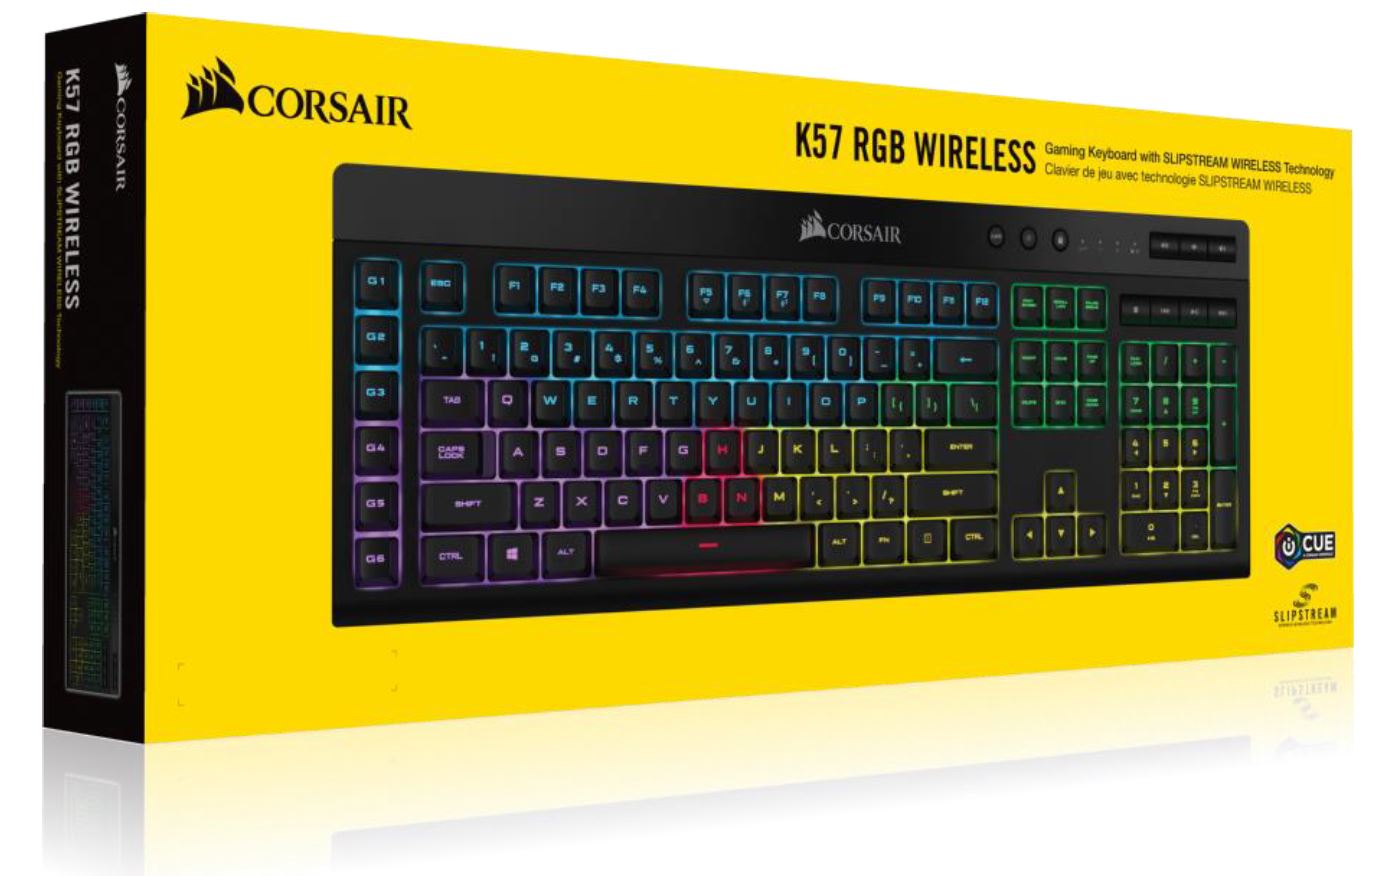 Corsair K57 RGB Wireless Keyboard with SLIPSTREAM Technology - Click Image to Close